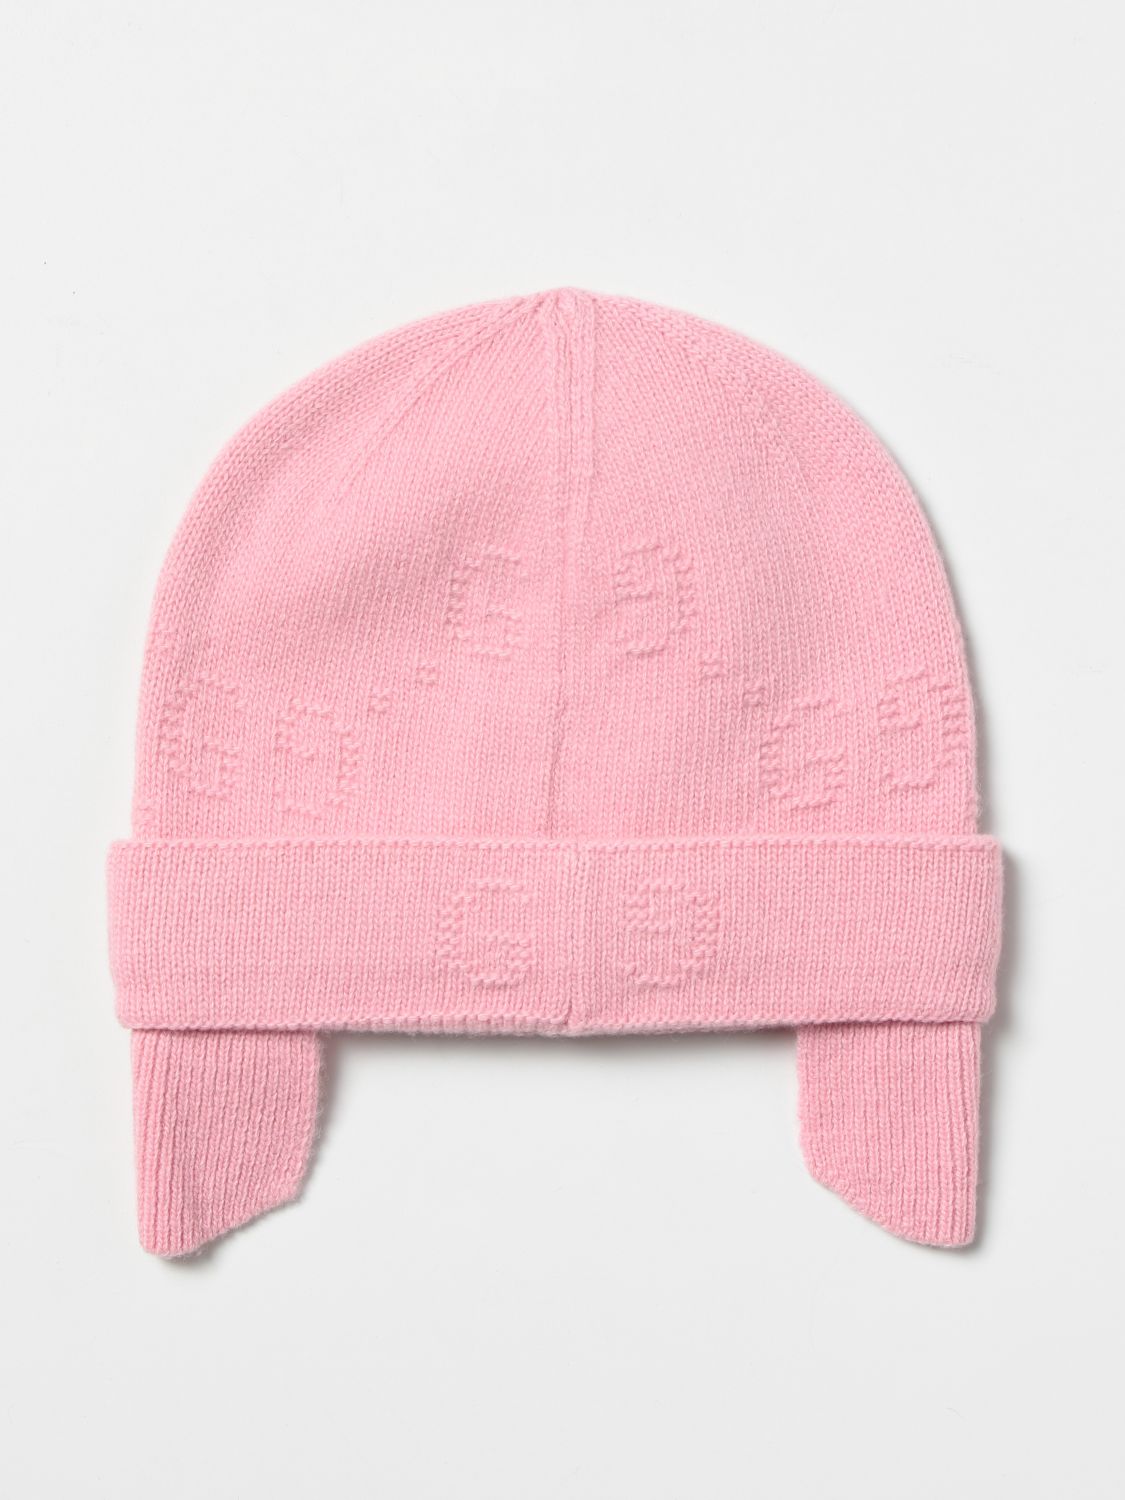 Hat Gucci: Gucci hat for kids pink 2